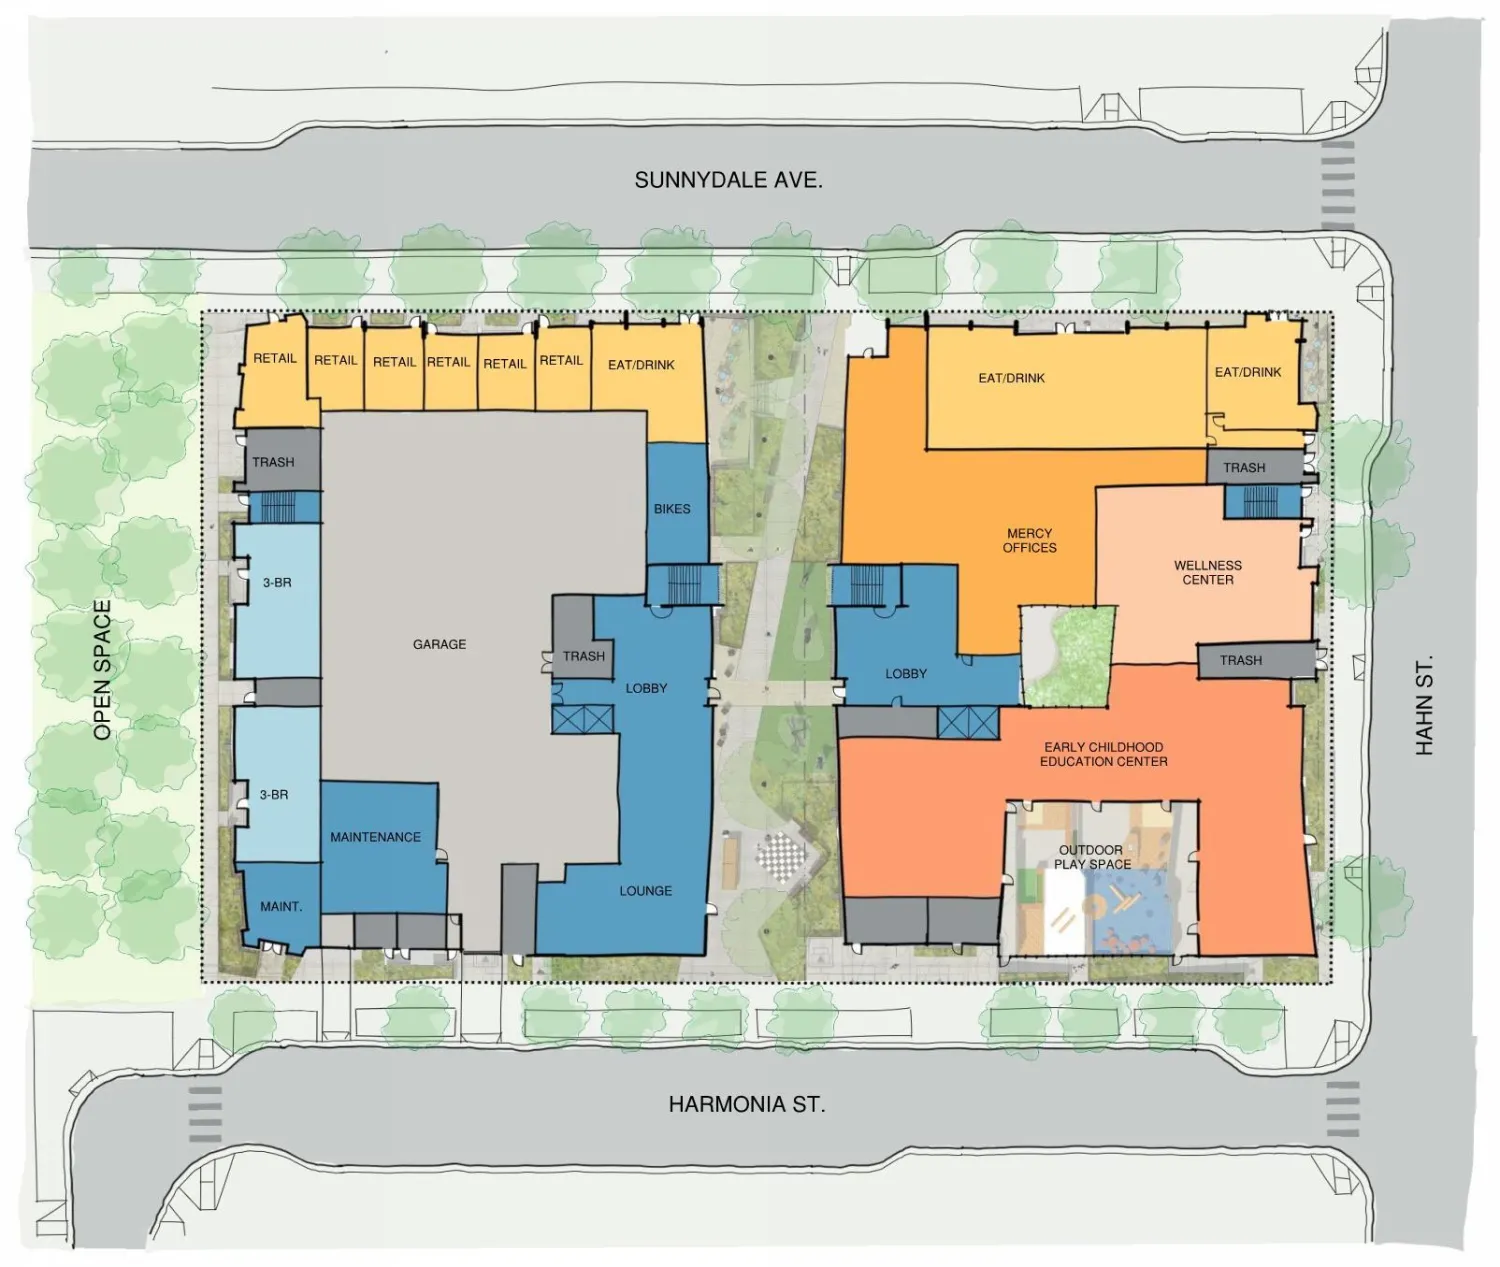 Ground level site plan for  Sunnydale Block 3 in San Francisco.